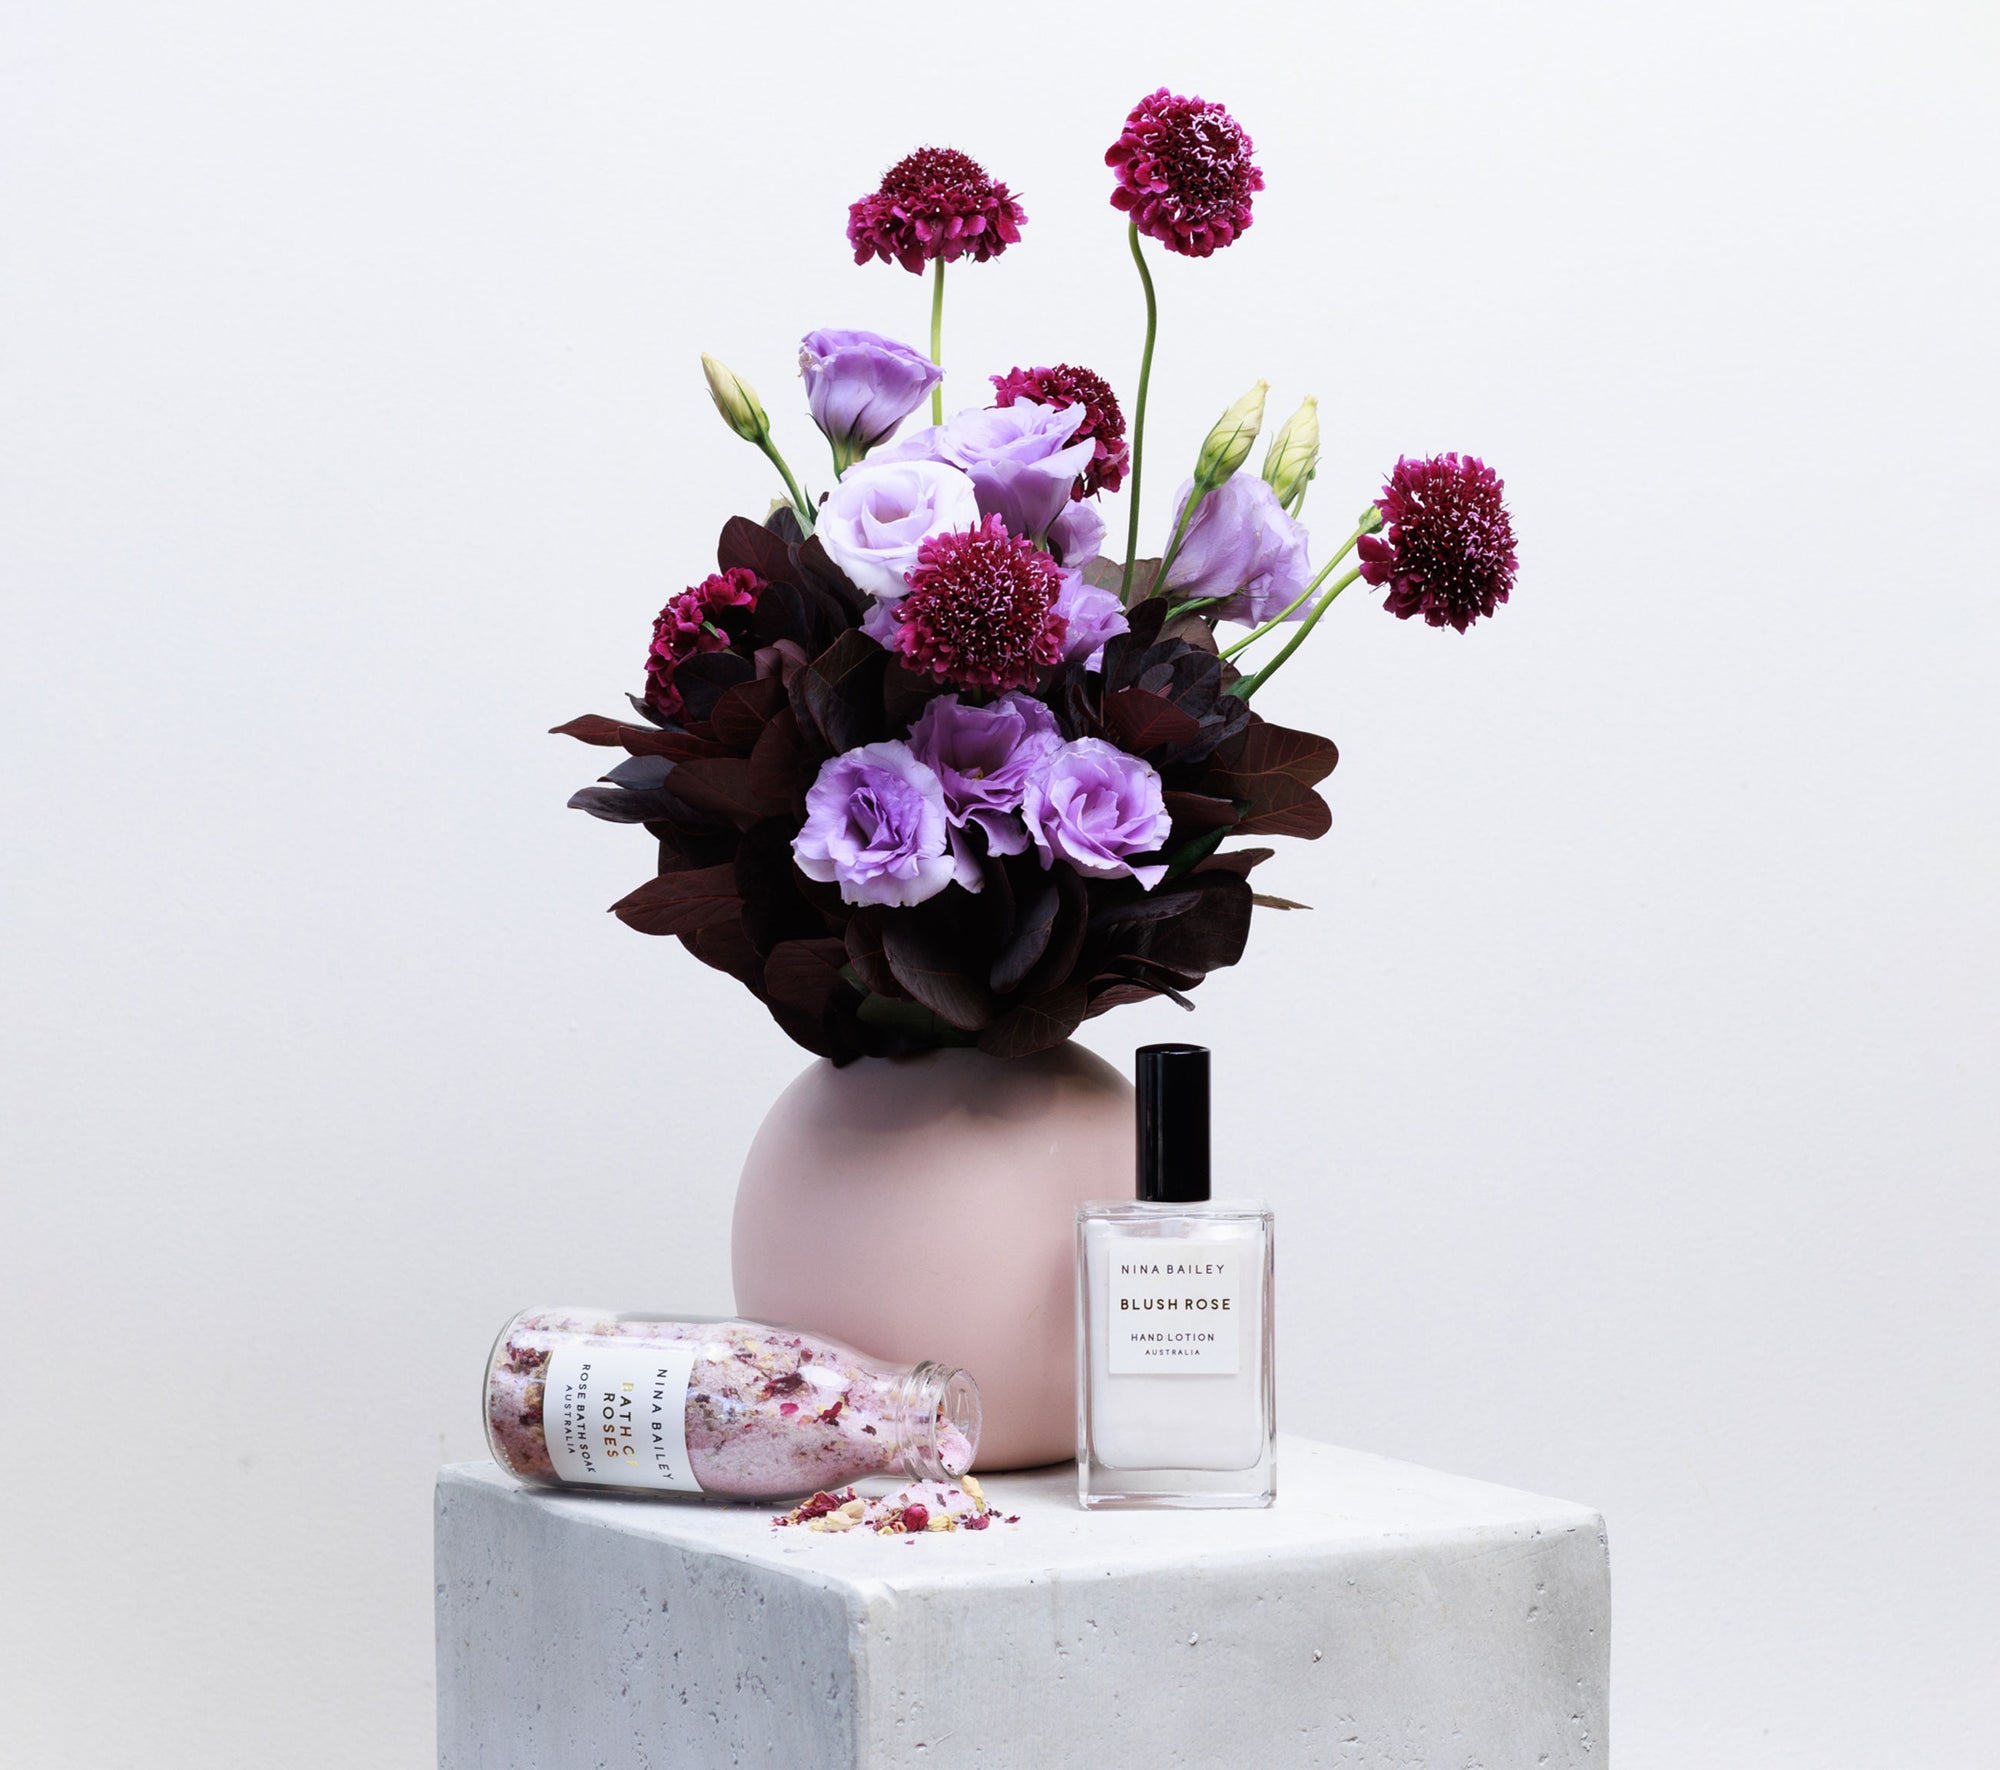 flowers delivered, Melbourne wide delivery, fresh flowers and gifts, care package, care pack, pamper.  